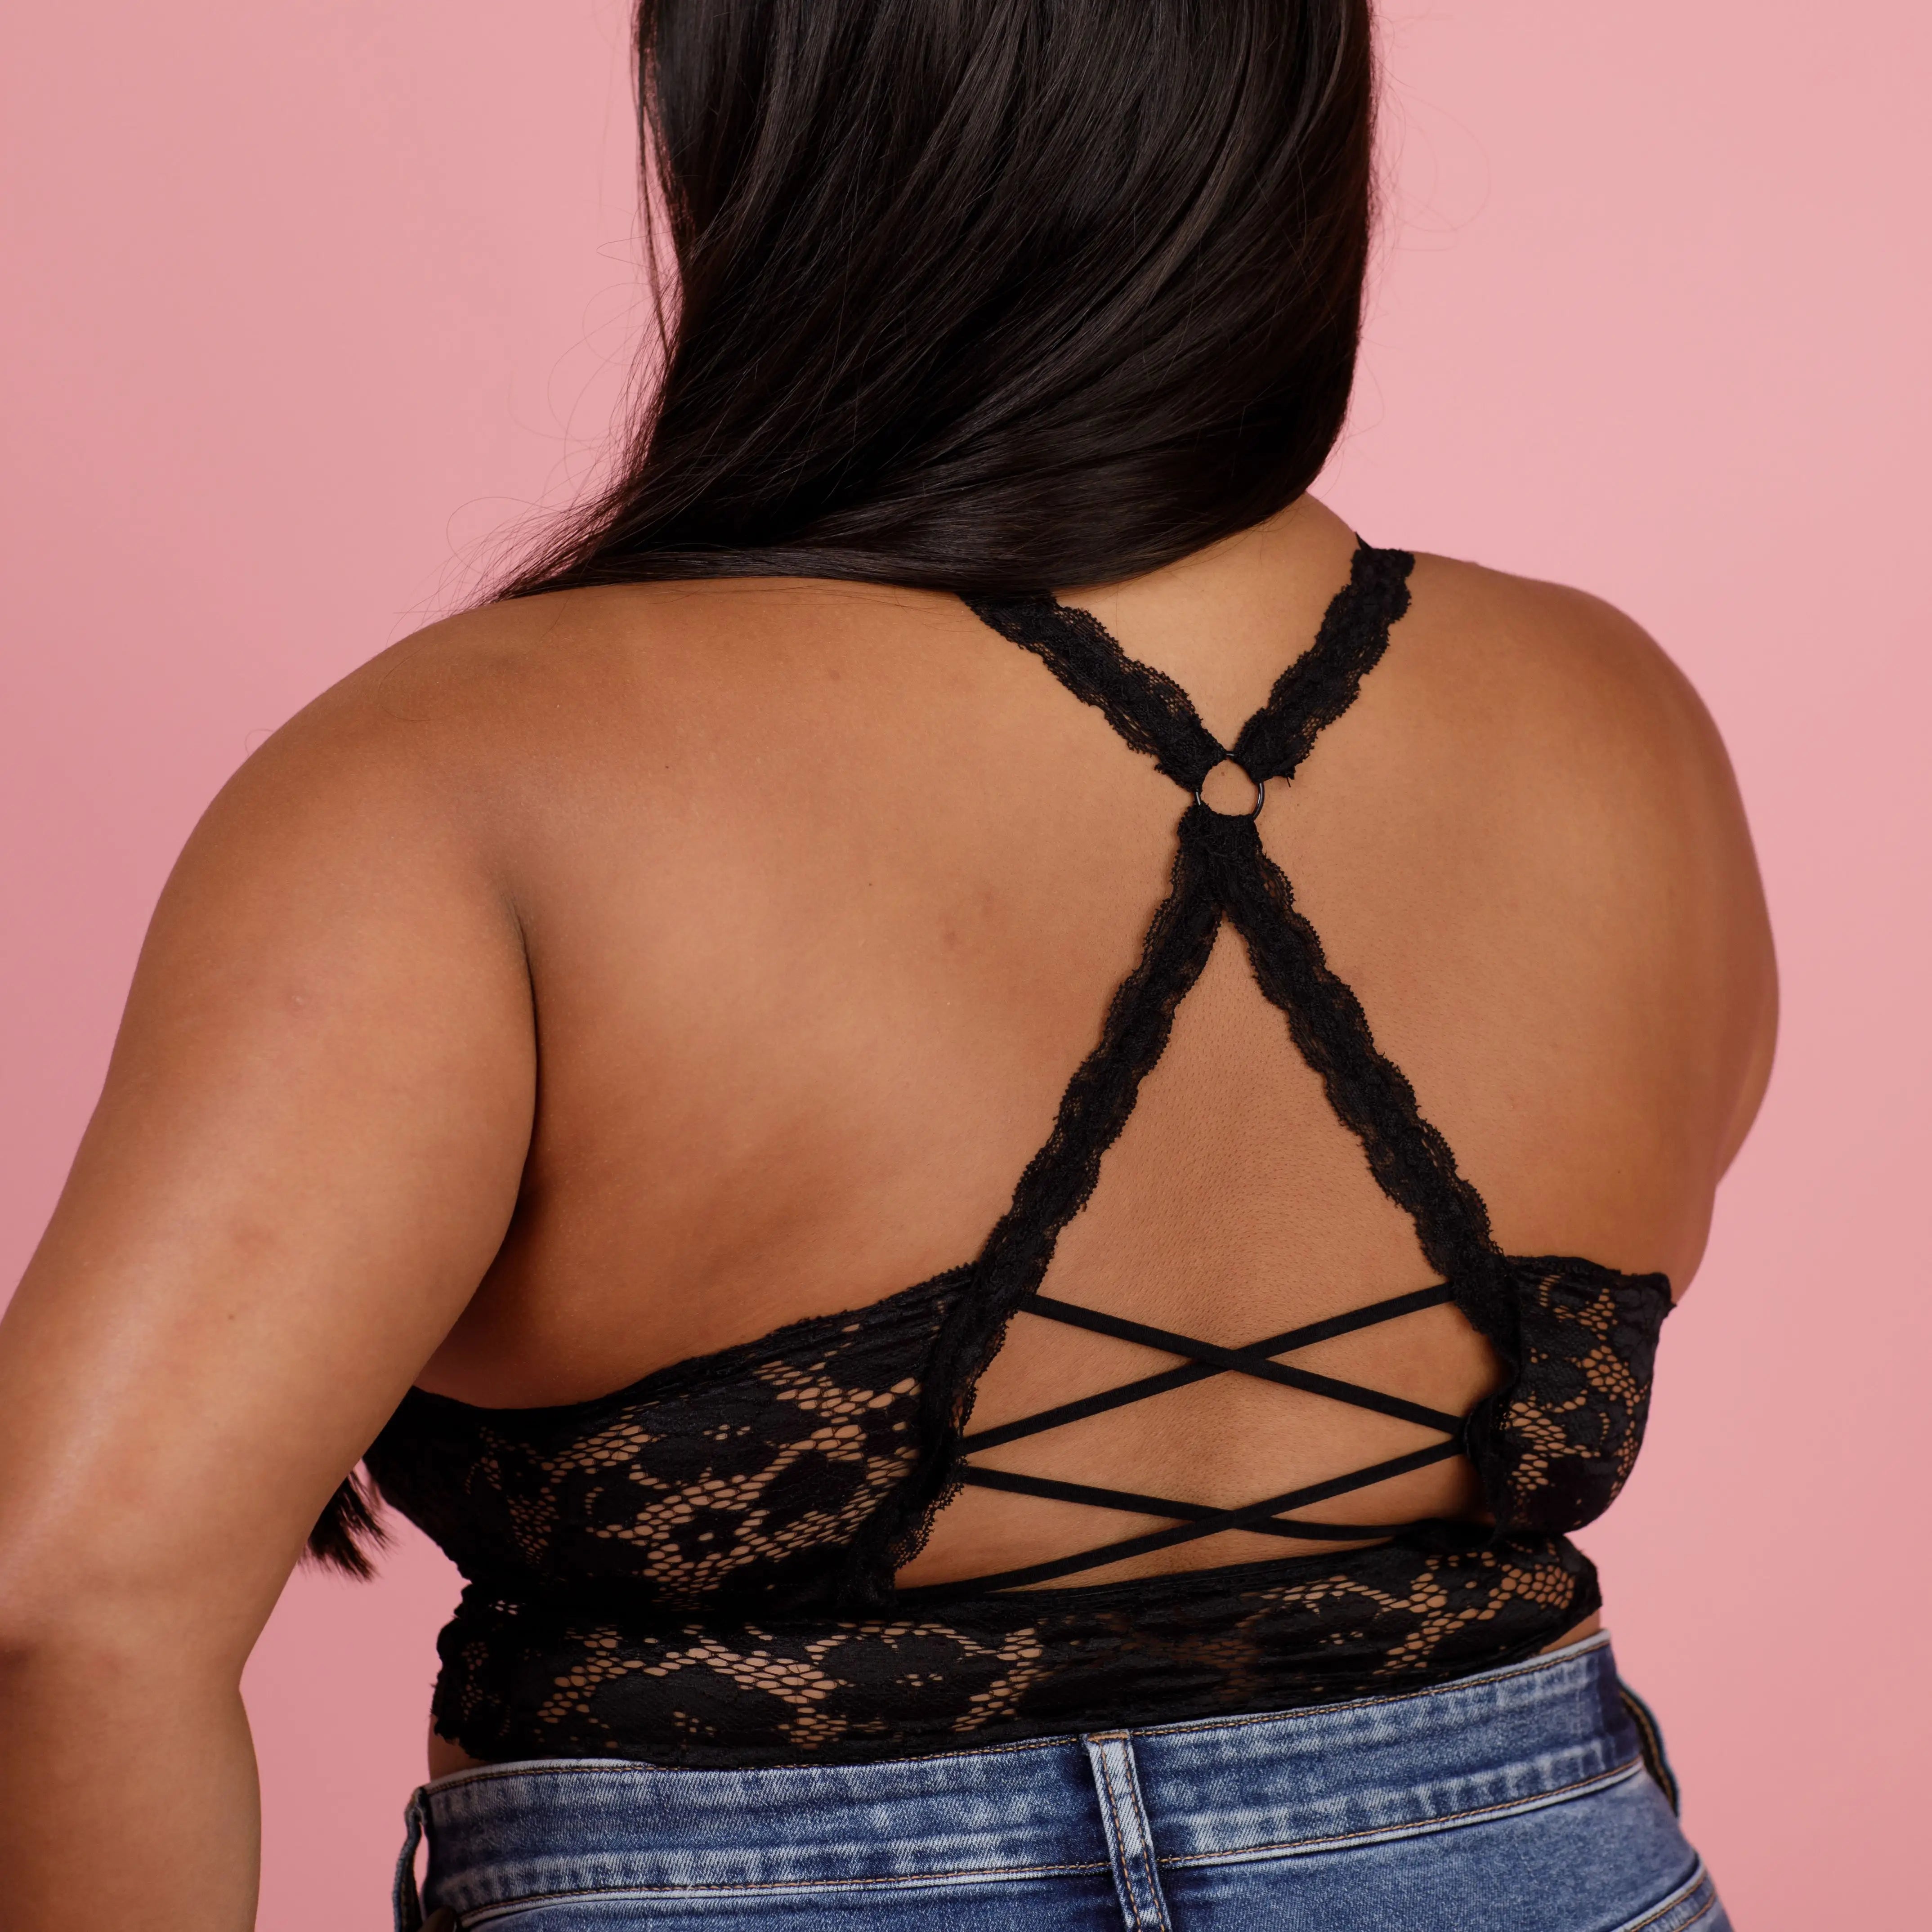 Juliette Deluxe Lace Bralette - Black - Angie's Strength & Style Boutique